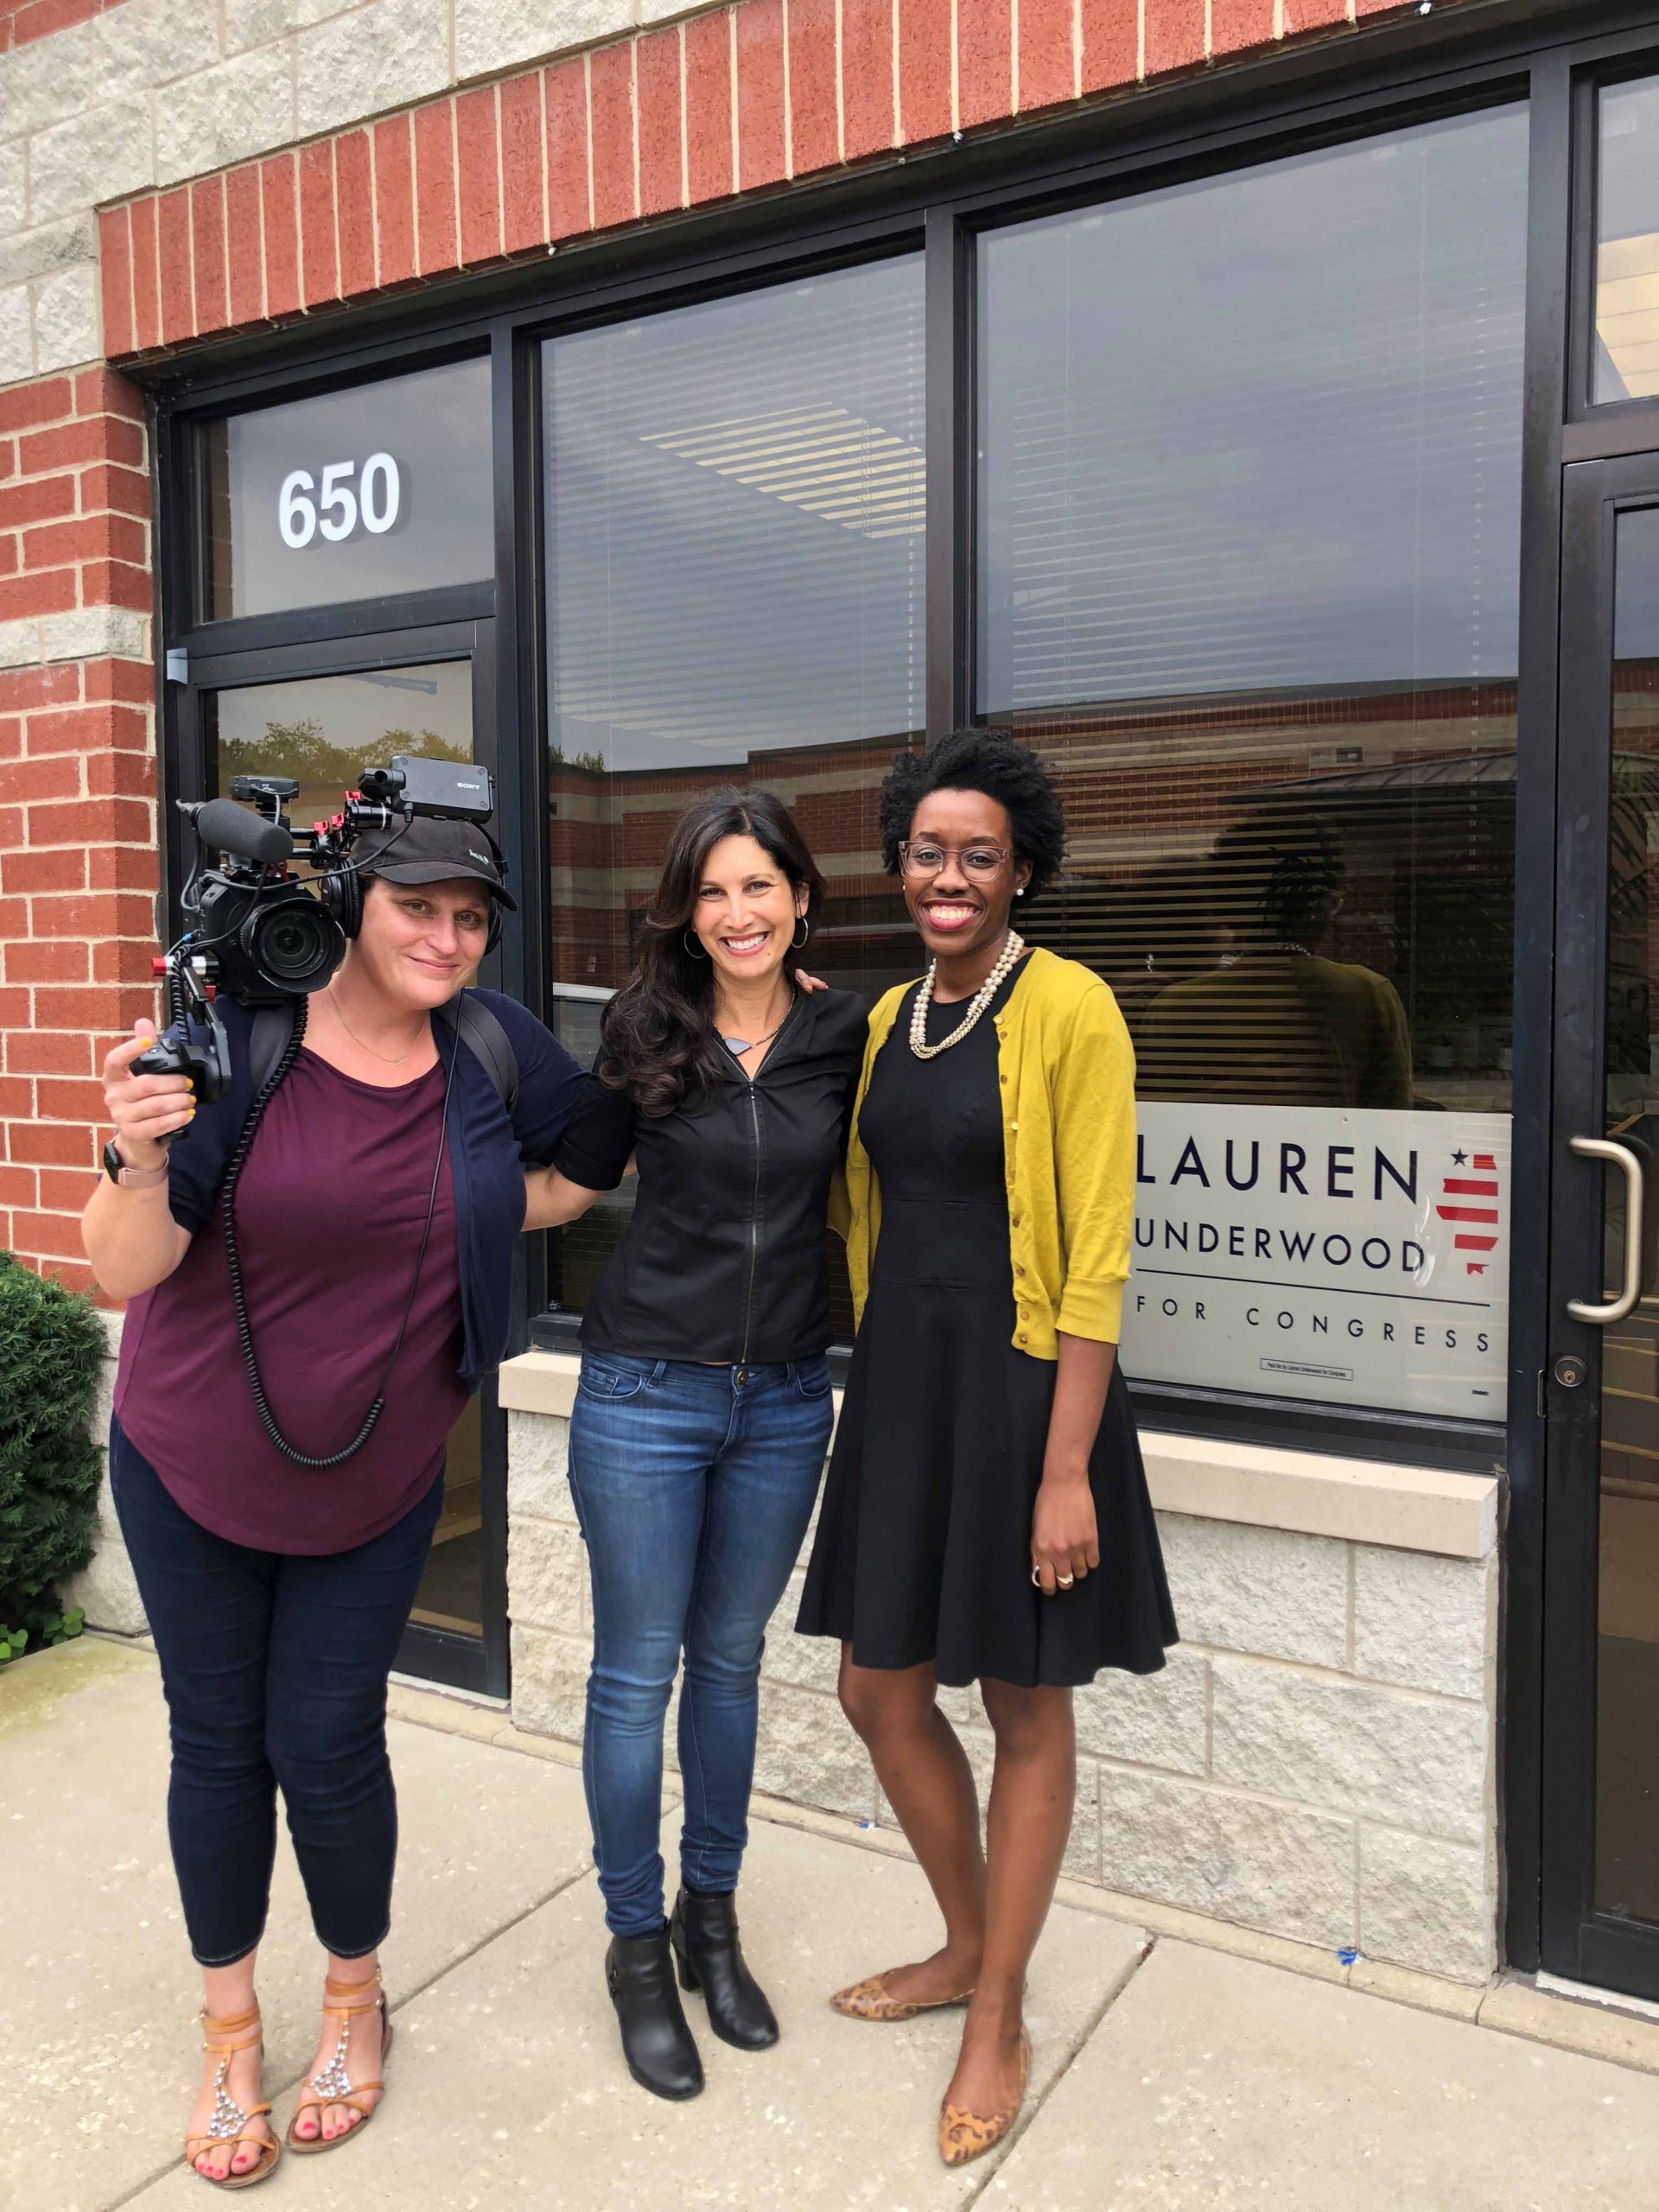 Wendy Sachs with Lauren Underwood during her 2018 campaign and SURGE cinematographer Margaret Byrne.